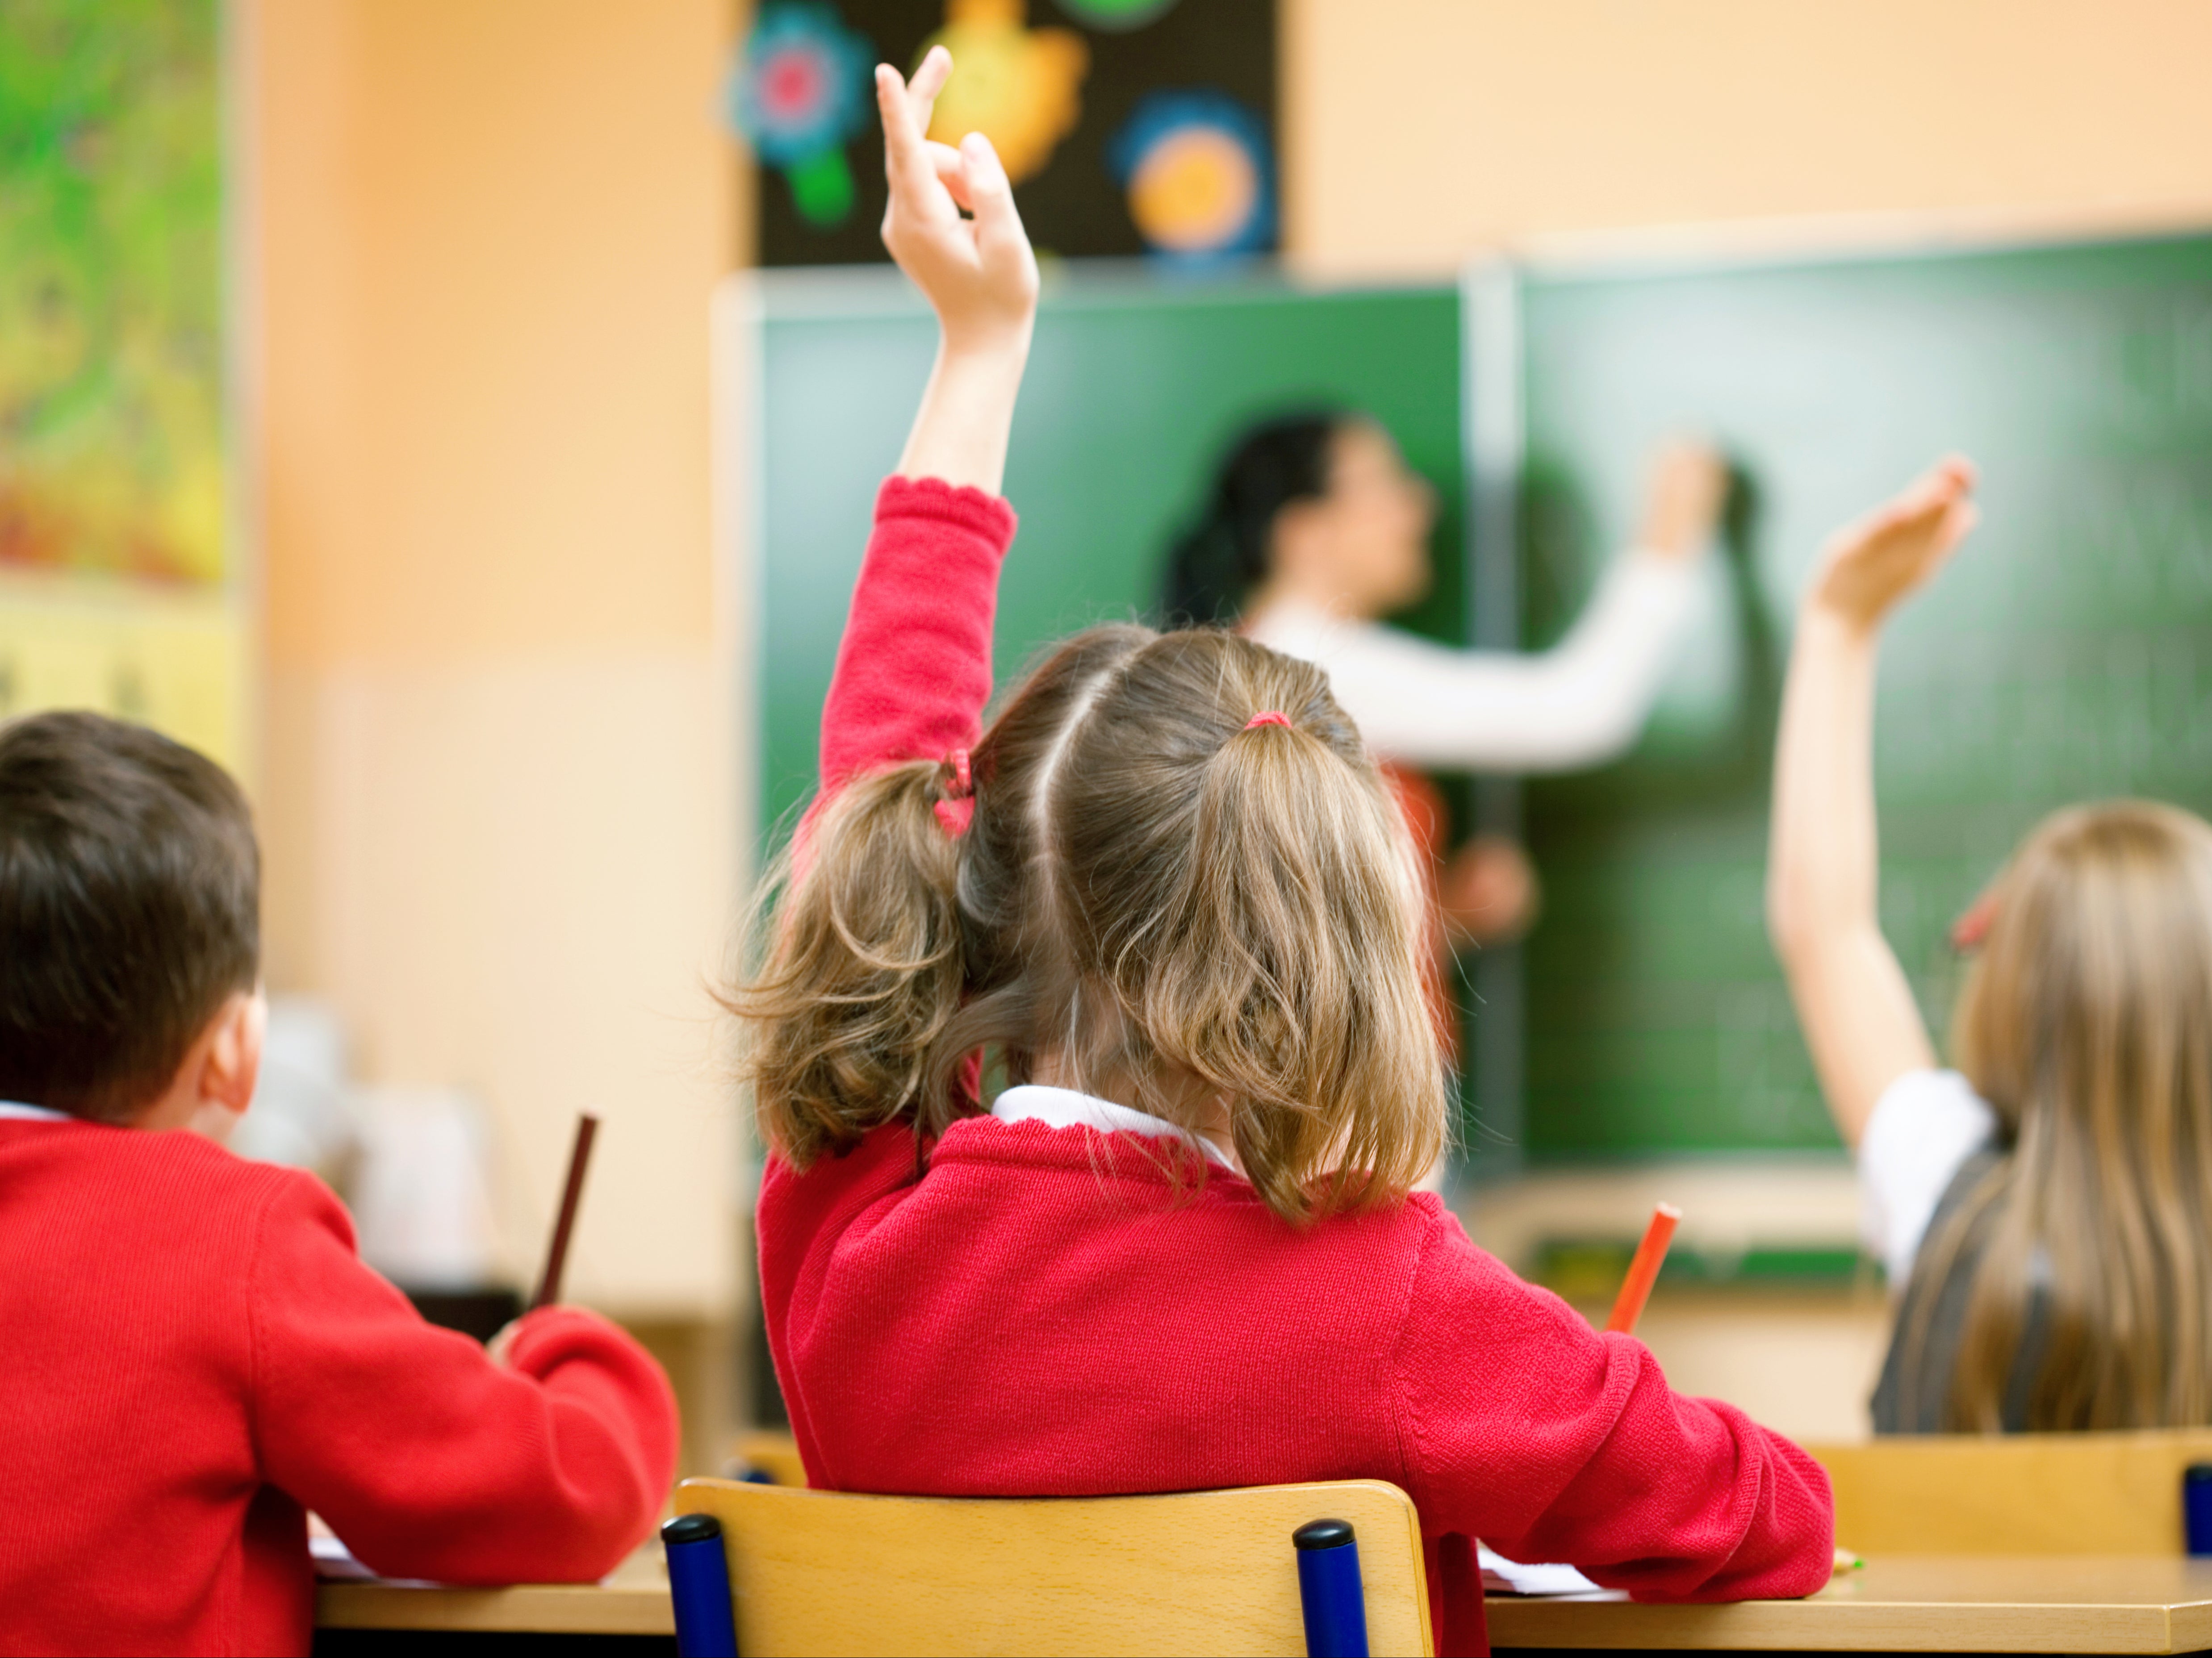 The education select committee has released a new report on white working class pupils